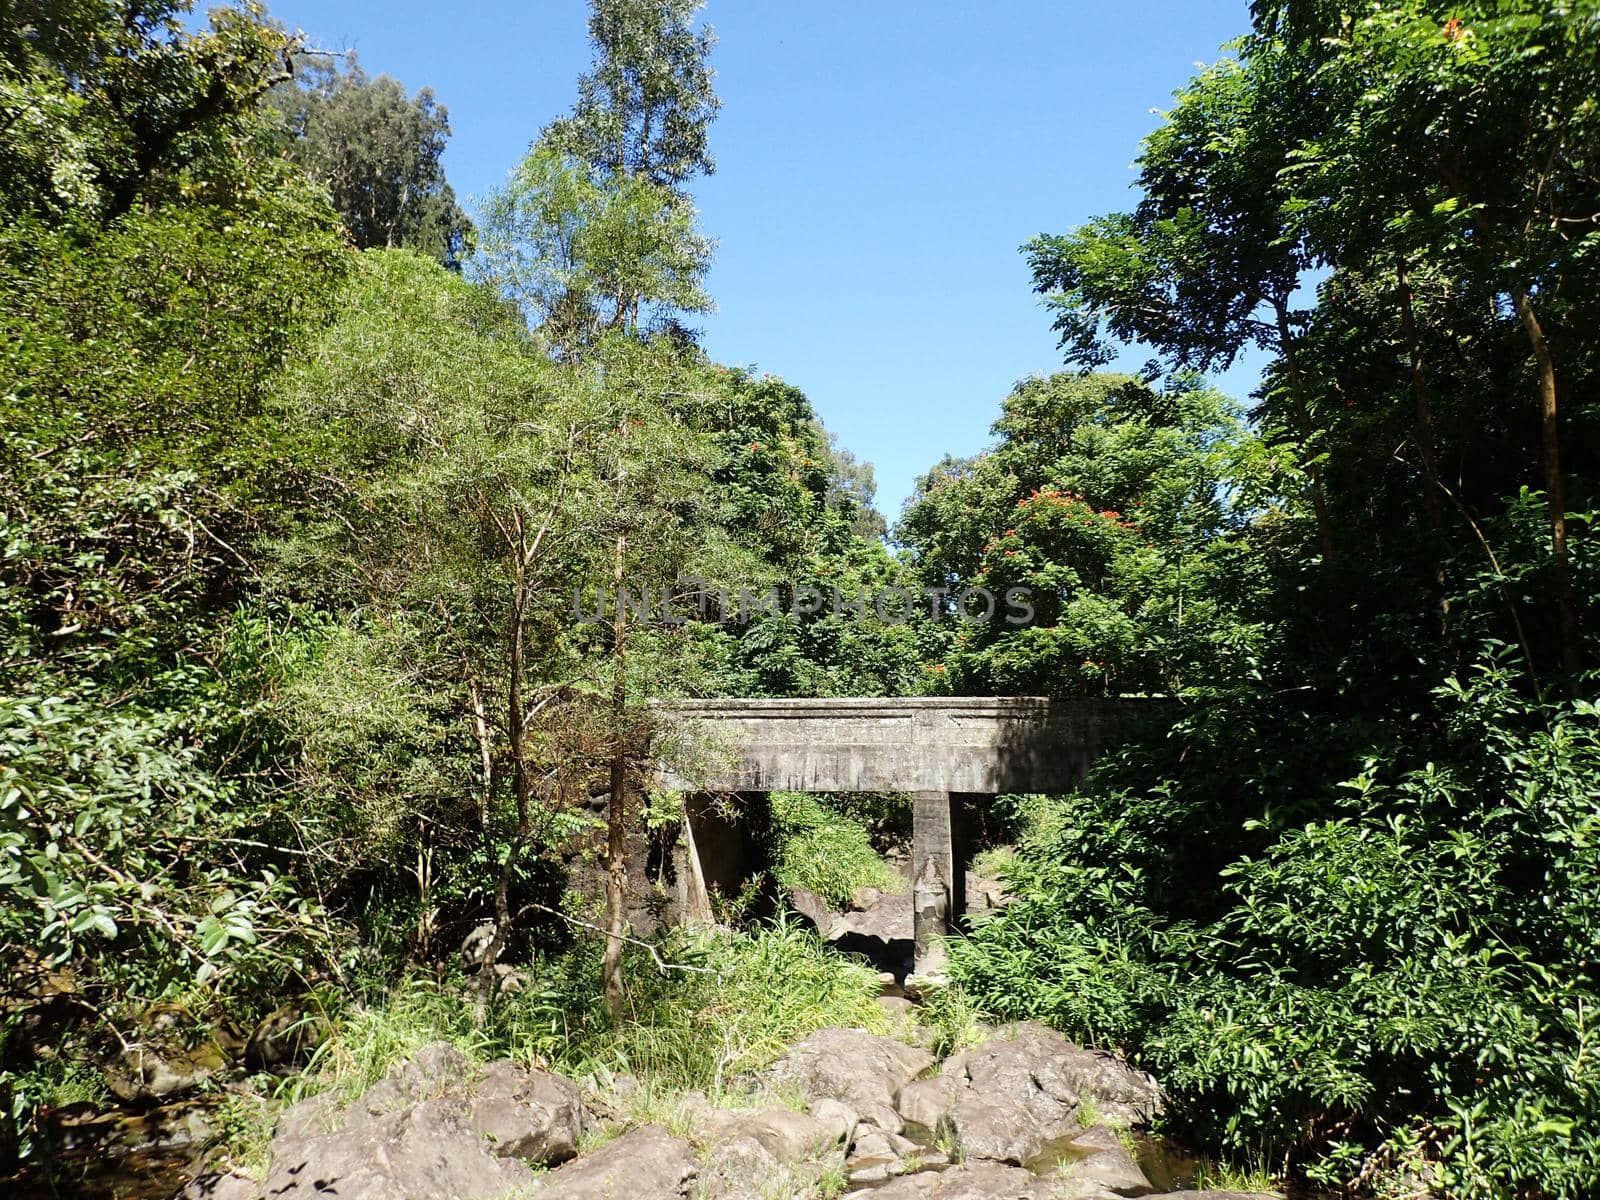 Bridge over small stream in forest in Maui on the Road to Hana. 